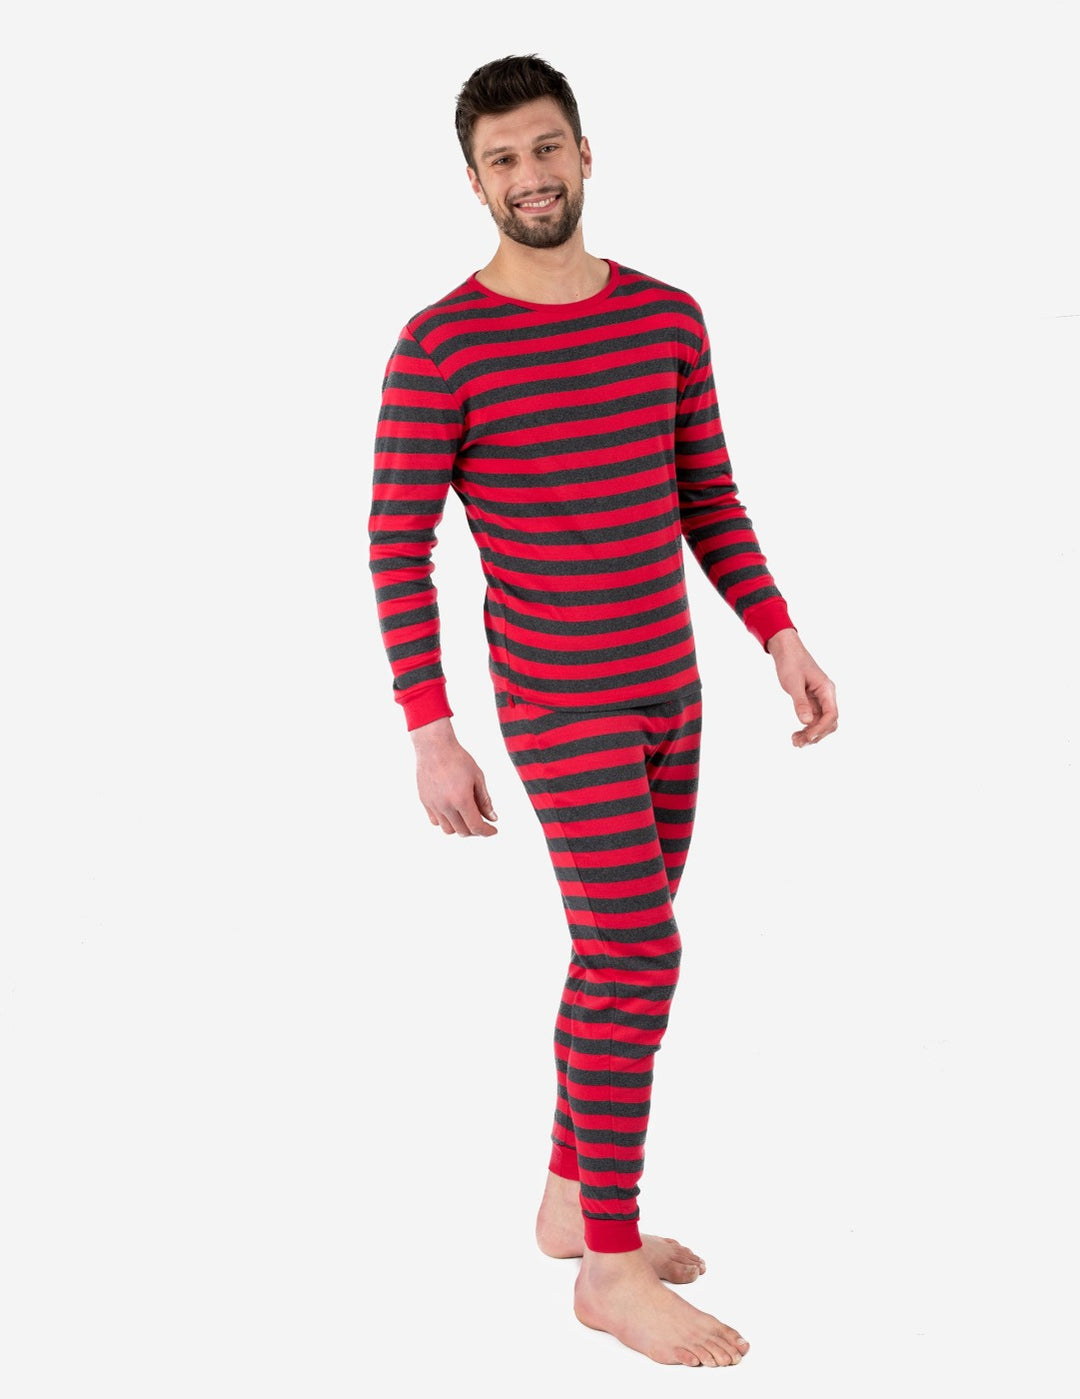 Men's Long-Sleeve Striped Pajamas - Charcoal SML in Men's Cotton